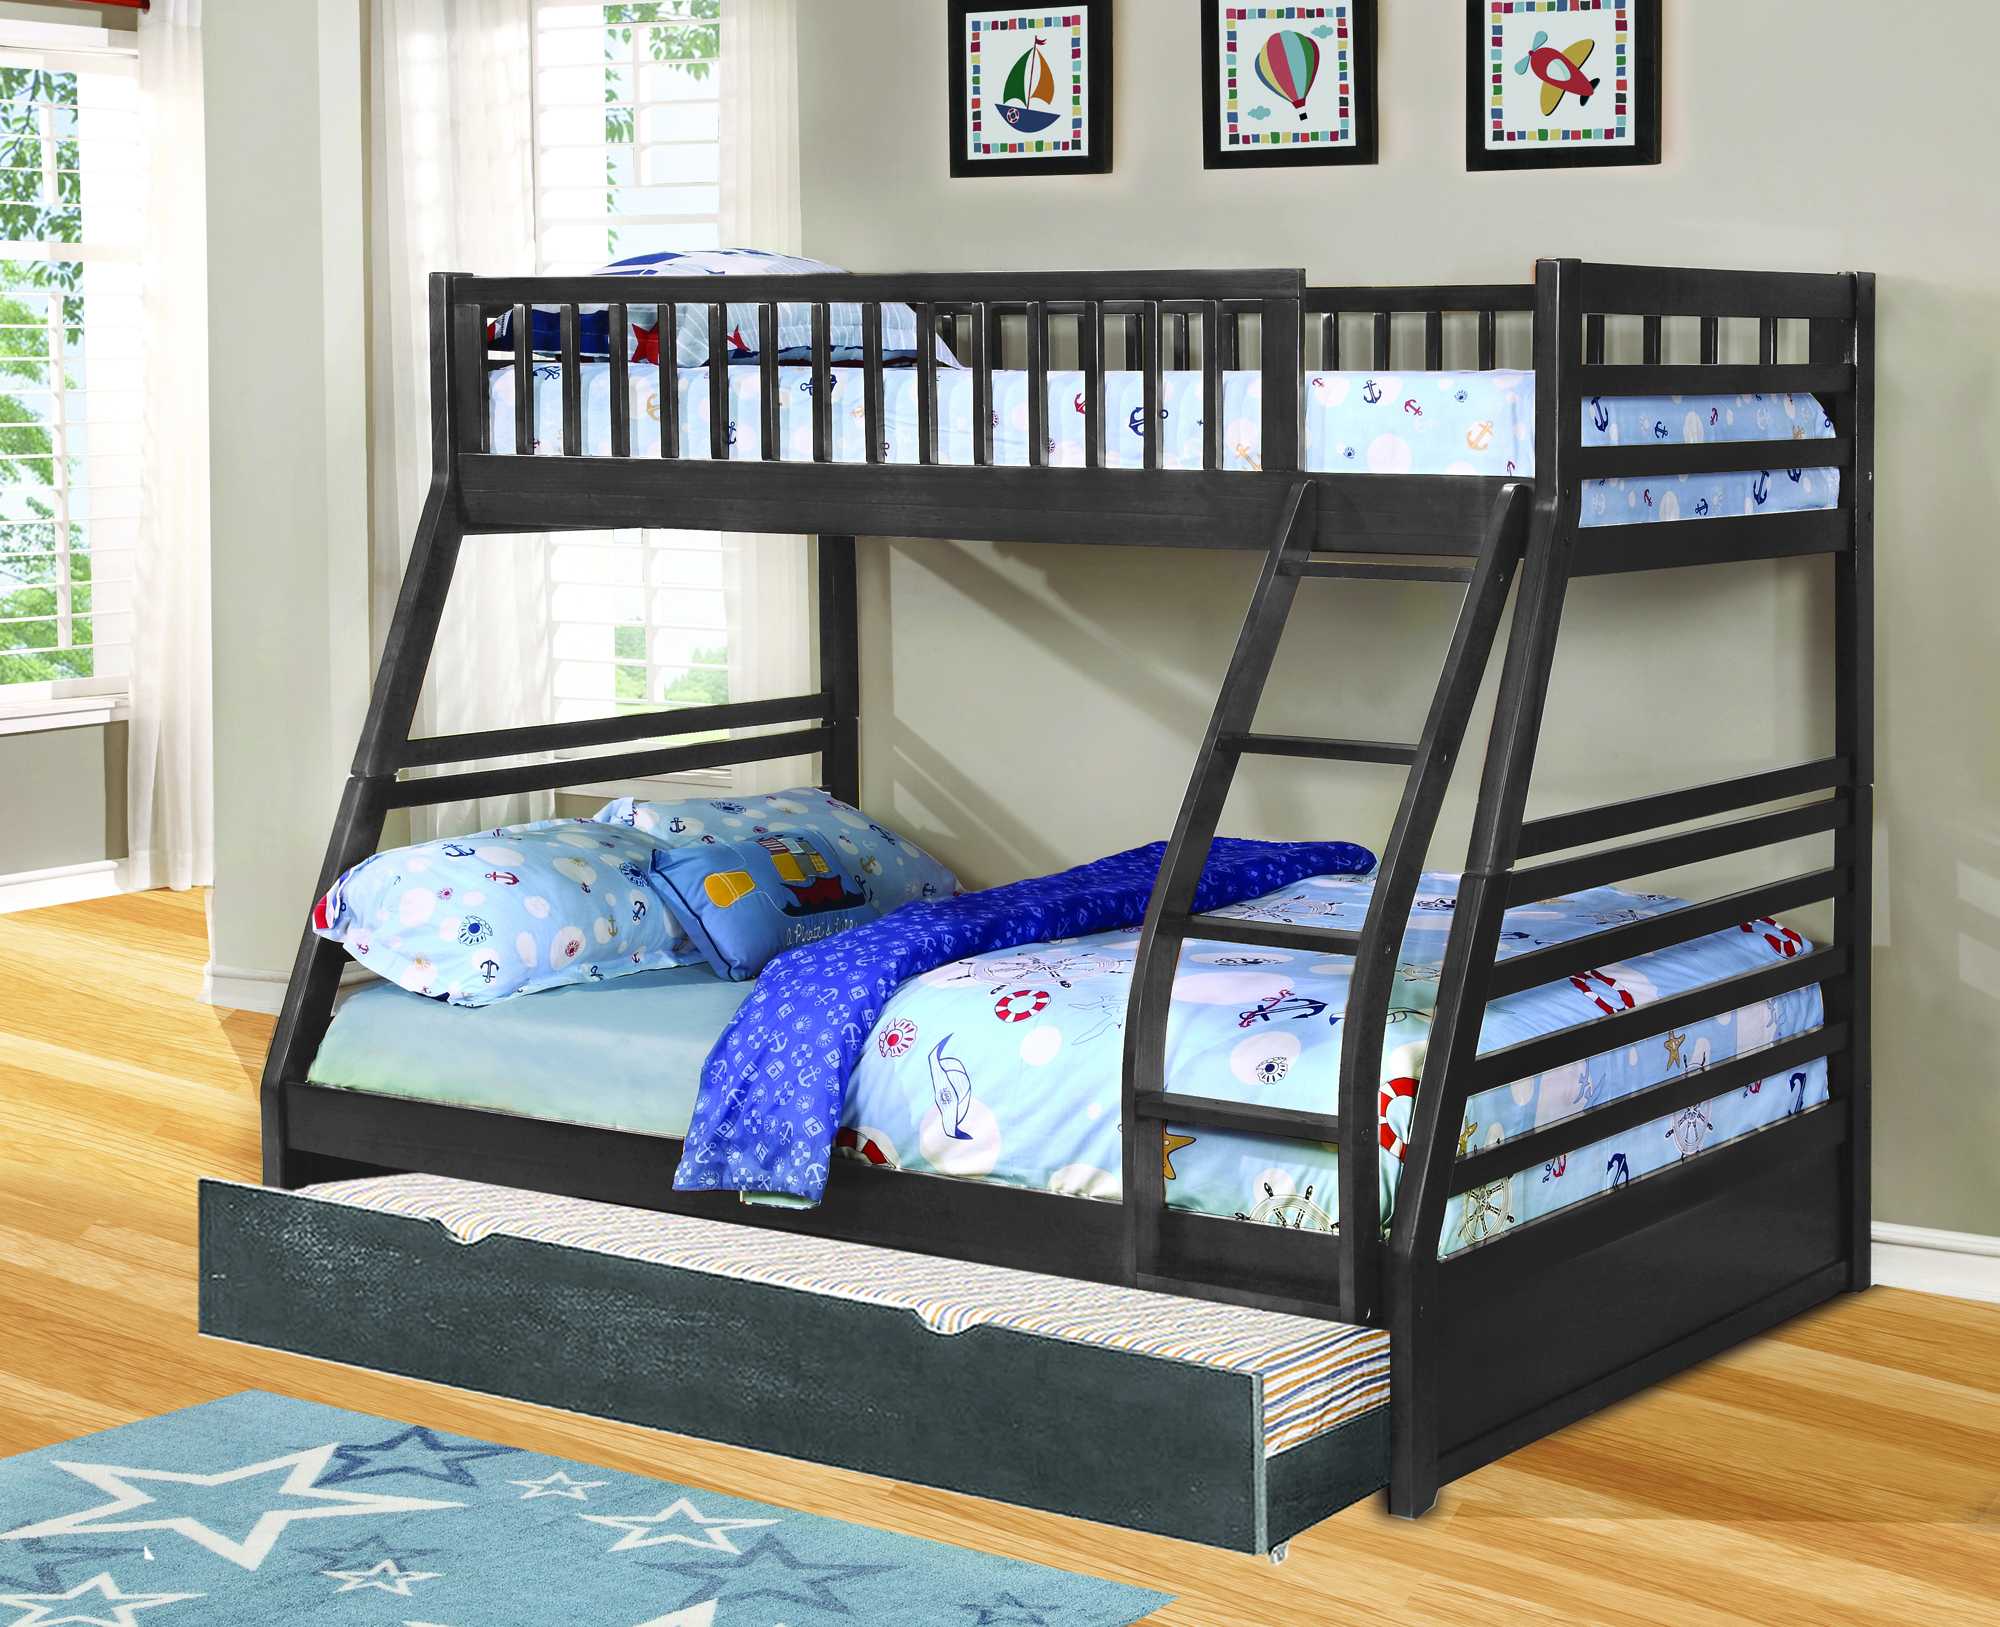 78.75" X 42.5-57.25" X 65" Grey Manufactured Wood and Solid Wood Twin or Full Bunk Bed with Matching Trundle